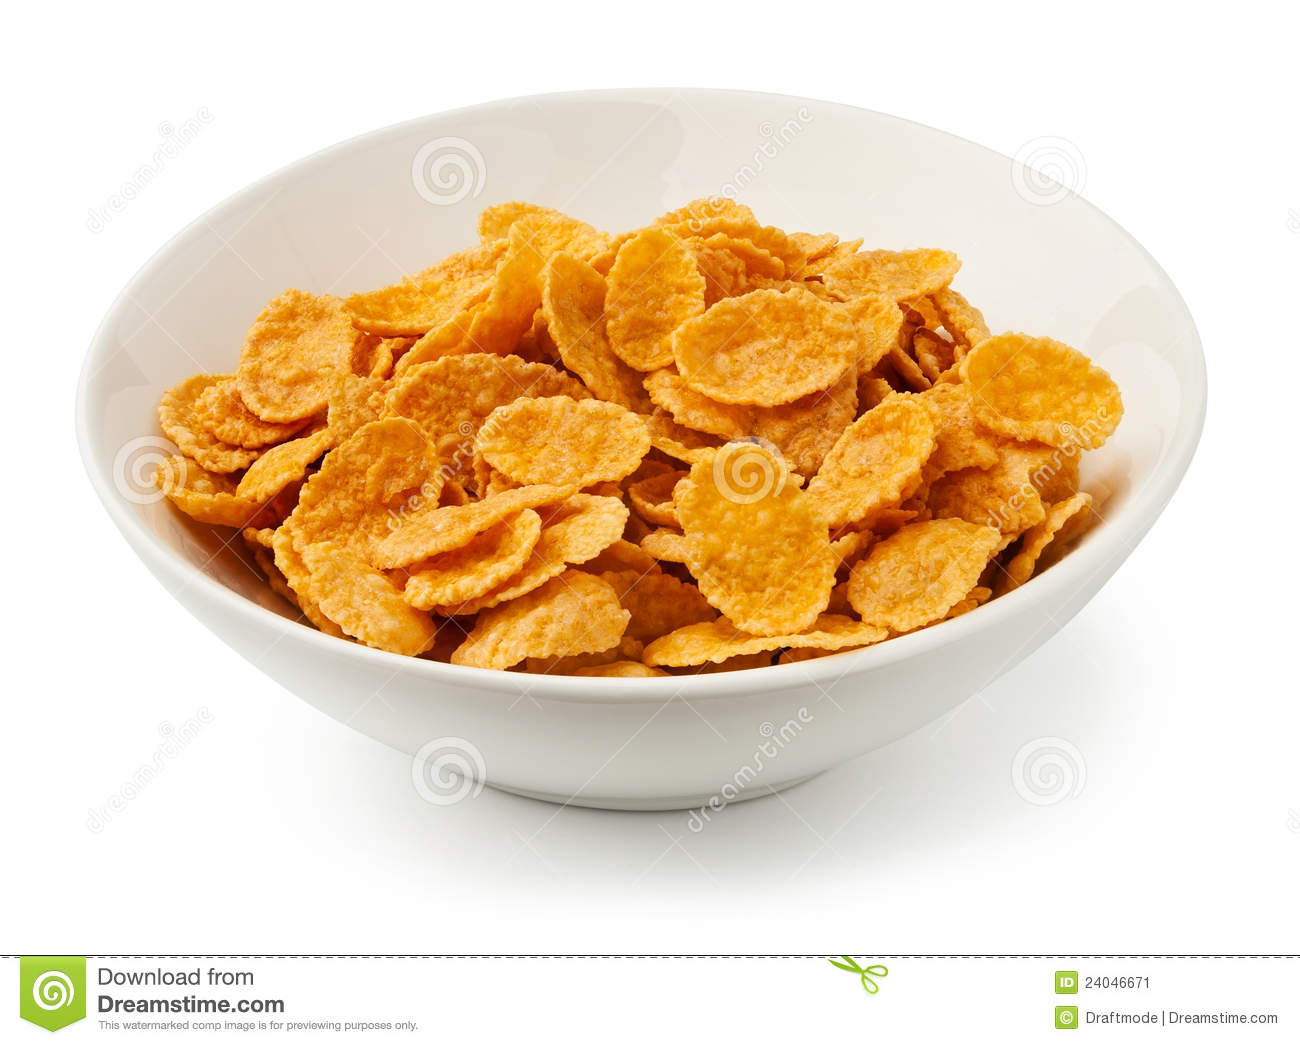 More Similar Stock Images Of   Corn Flakes In A Bowl